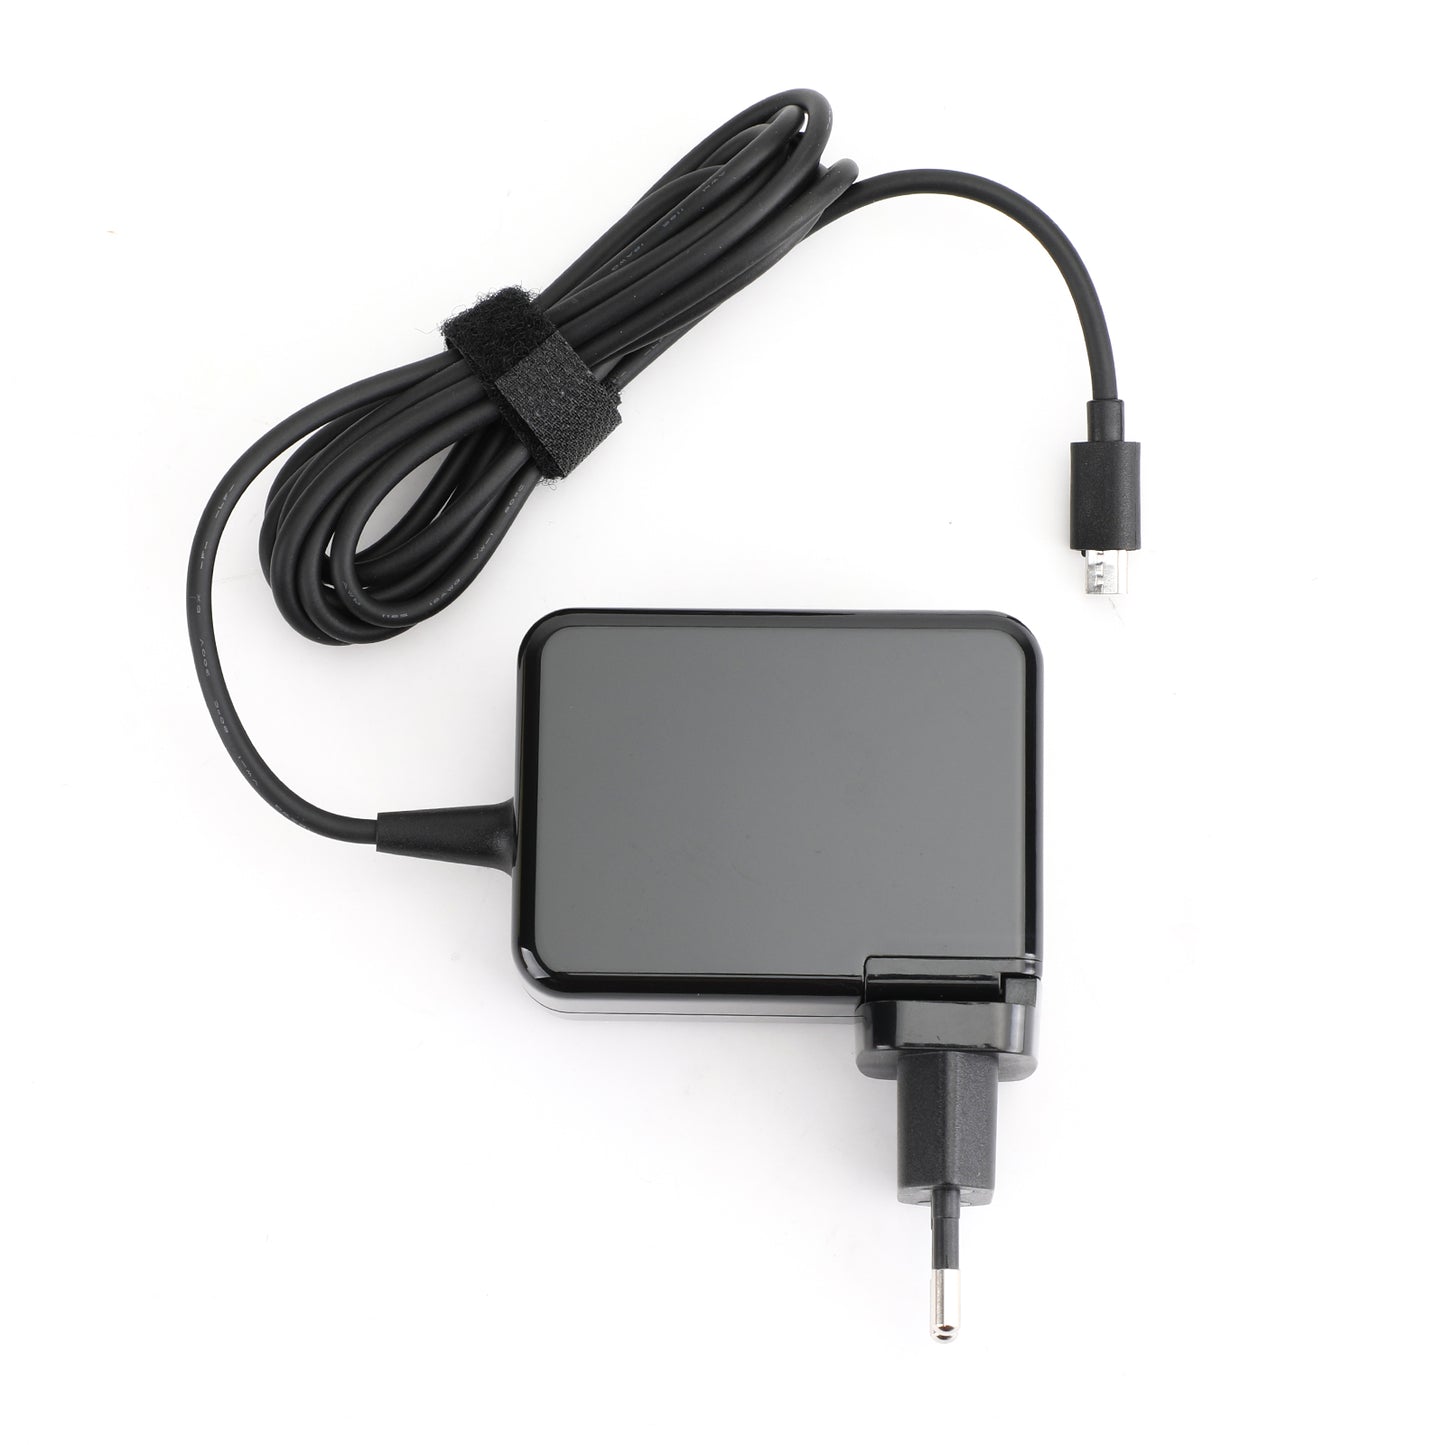 19.5V 1.2A AC Adapter Power Wall Charger for Dell Venue 11 Pro 077GR6 7140 7139